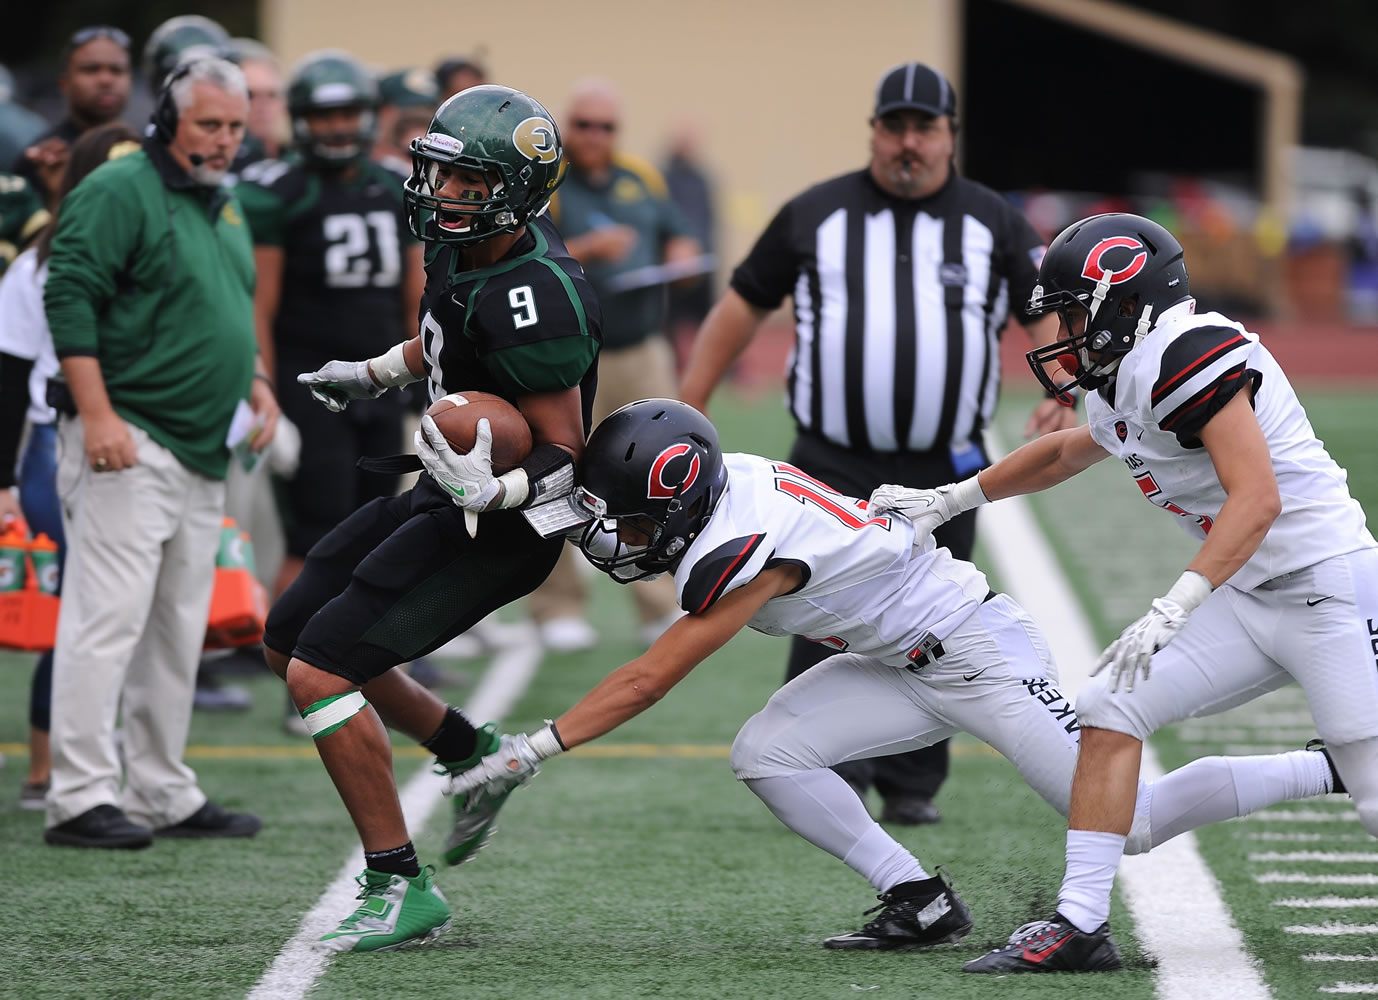 Evergreen player Dustin Nettles is tackled by Camas player Kade Anderson during a game at McKenzie Stadium in Vancouver Friday September 25, 2015.